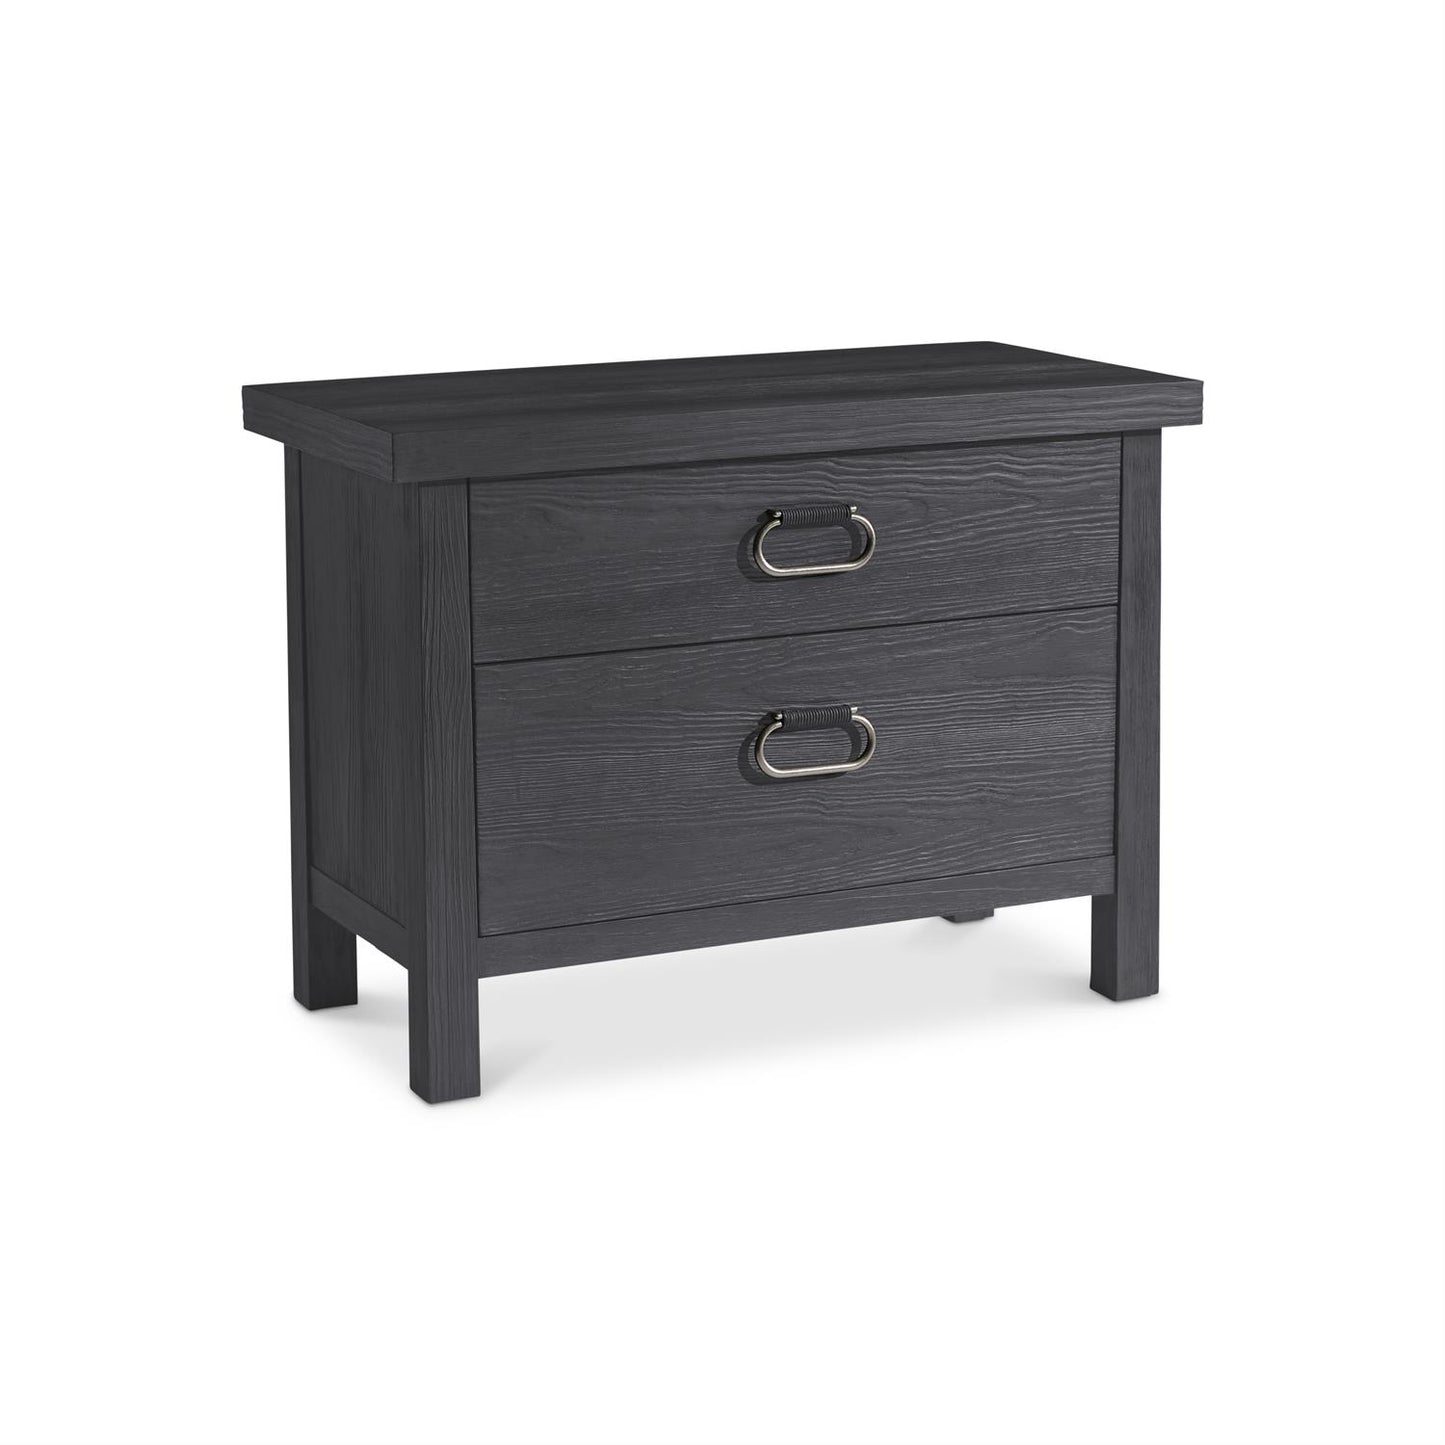 Rianon Two Drawers Flat Cut Nightstand